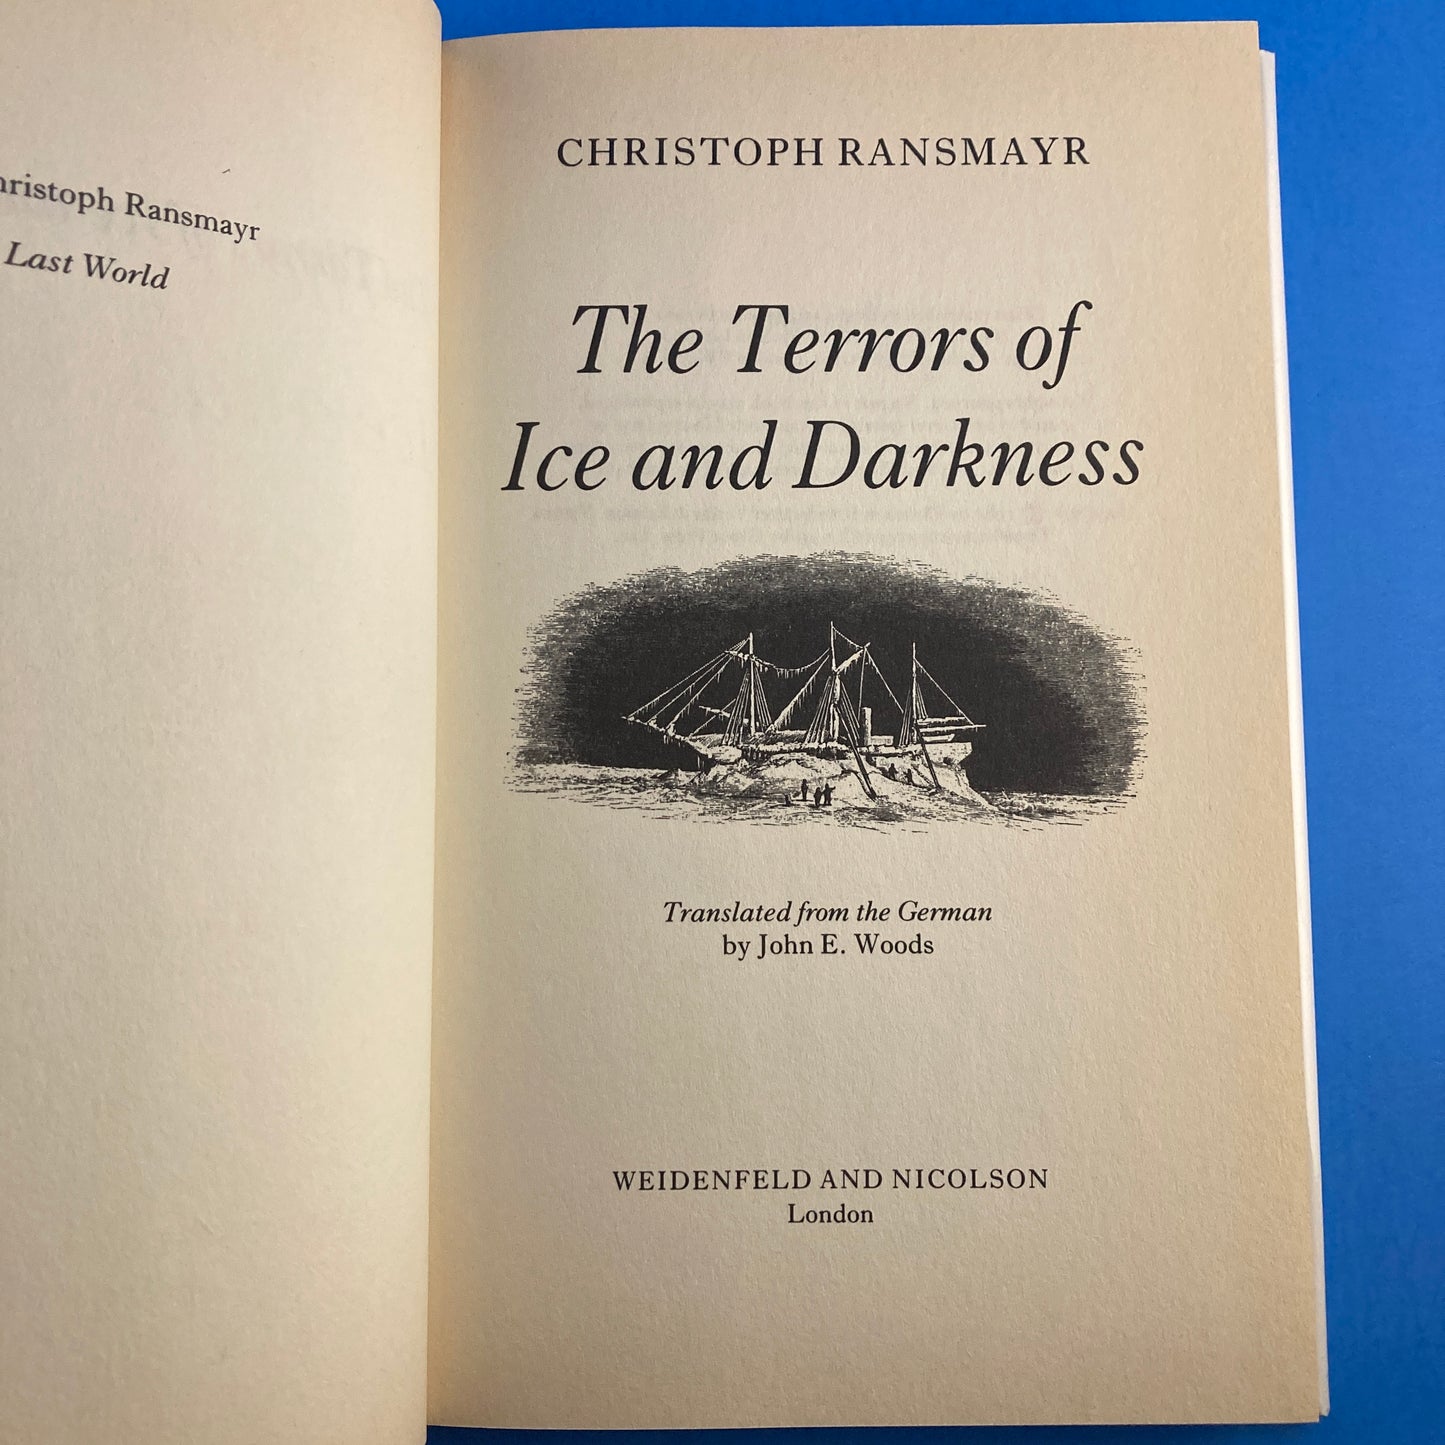 The Terrors of Ice and Darkness